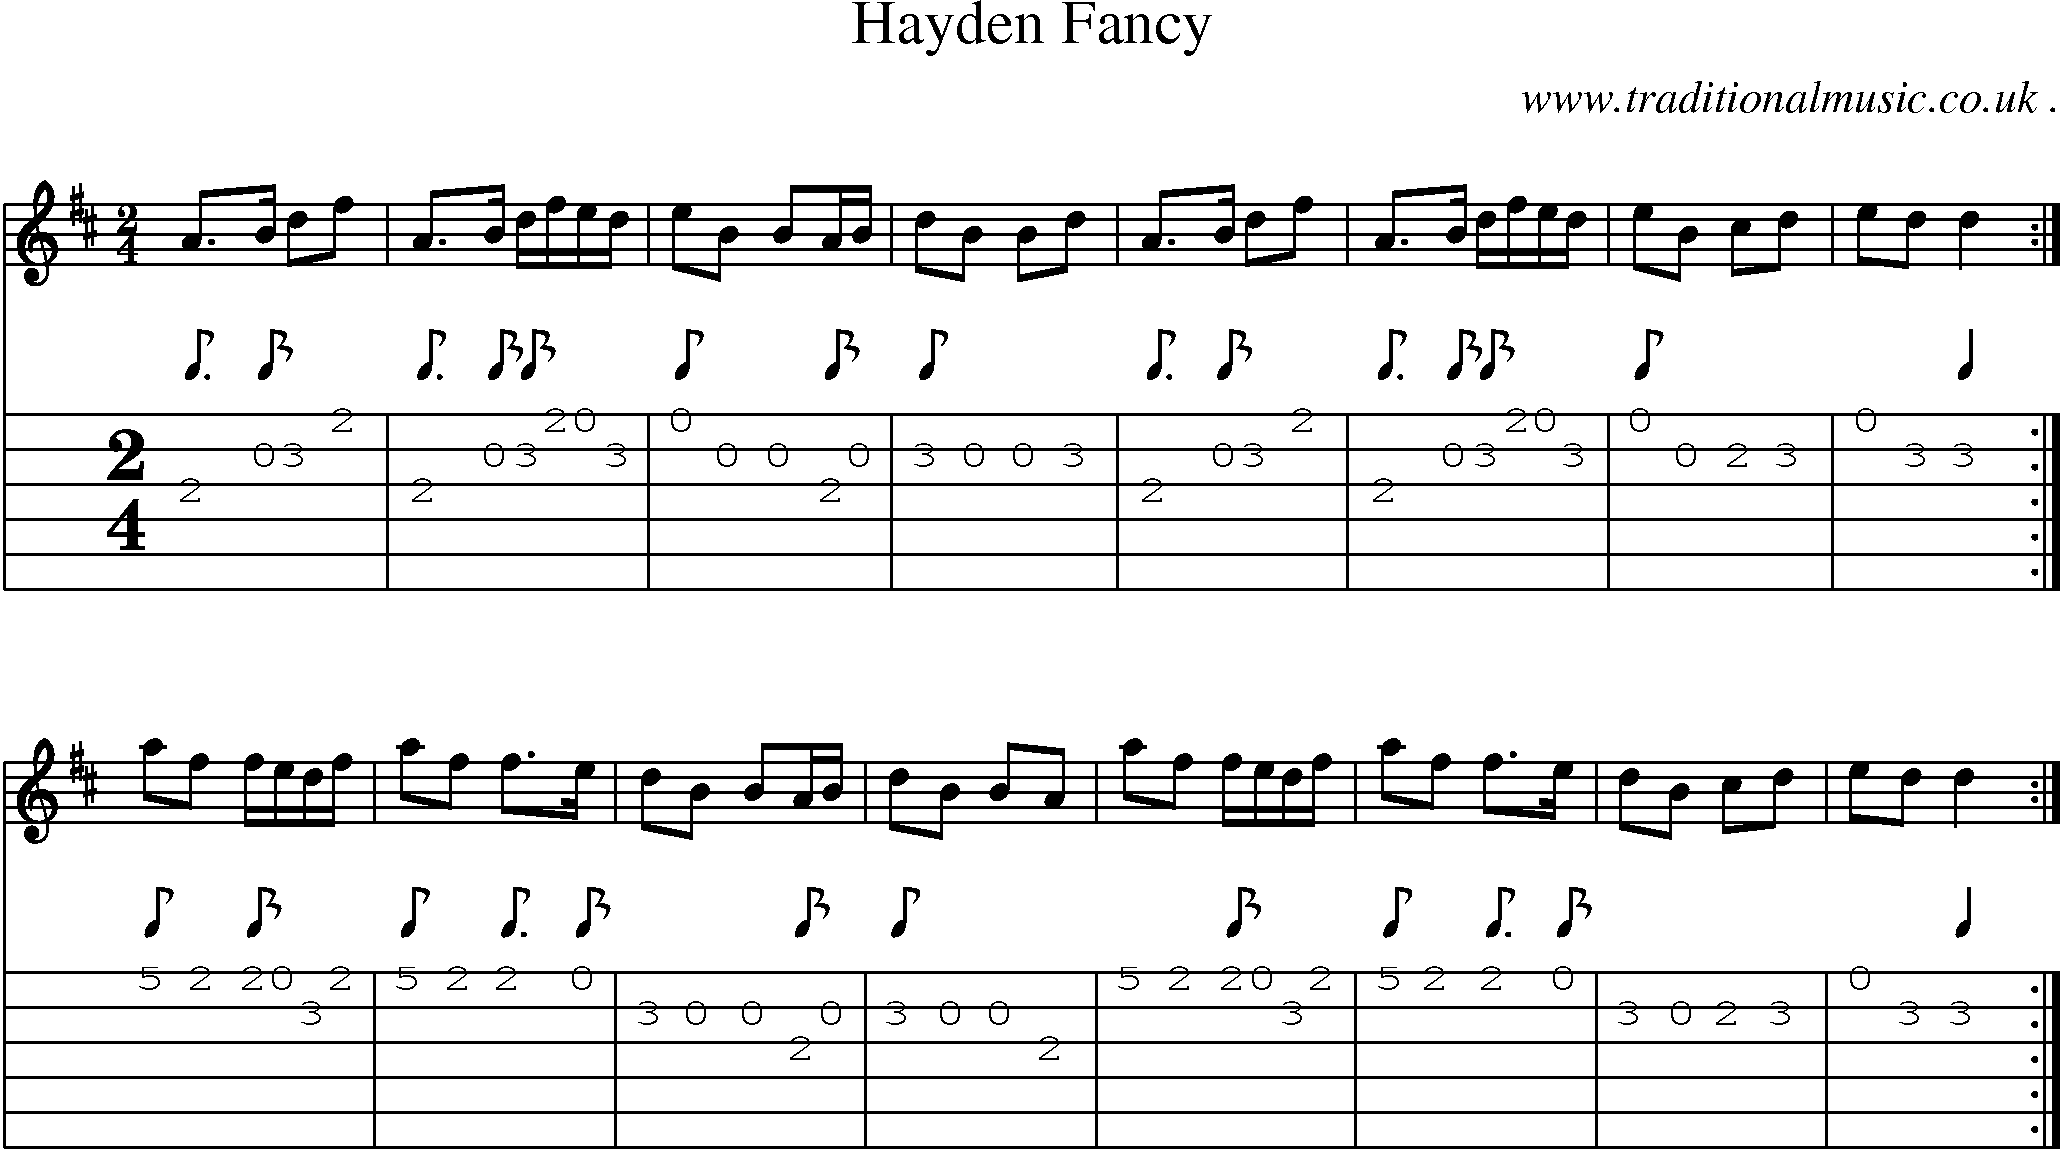 Sheet-Music and Guitar Tabs for Hayden Fancy